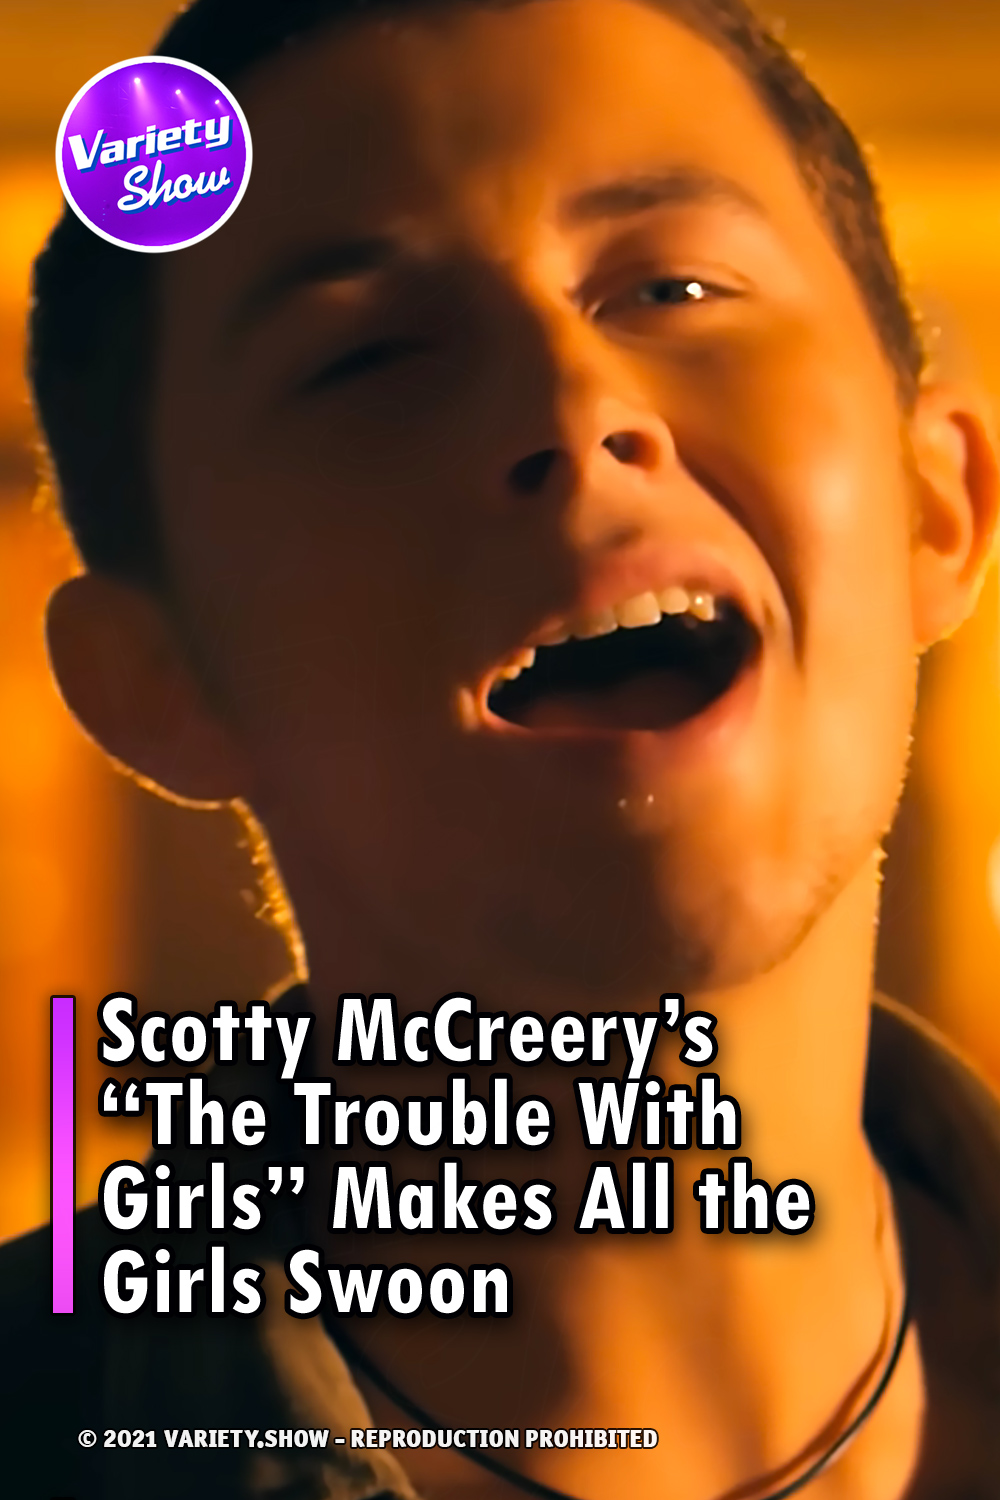 Scotty McCreery’s “The Trouble With Girls” Makes All the Girls Swoon